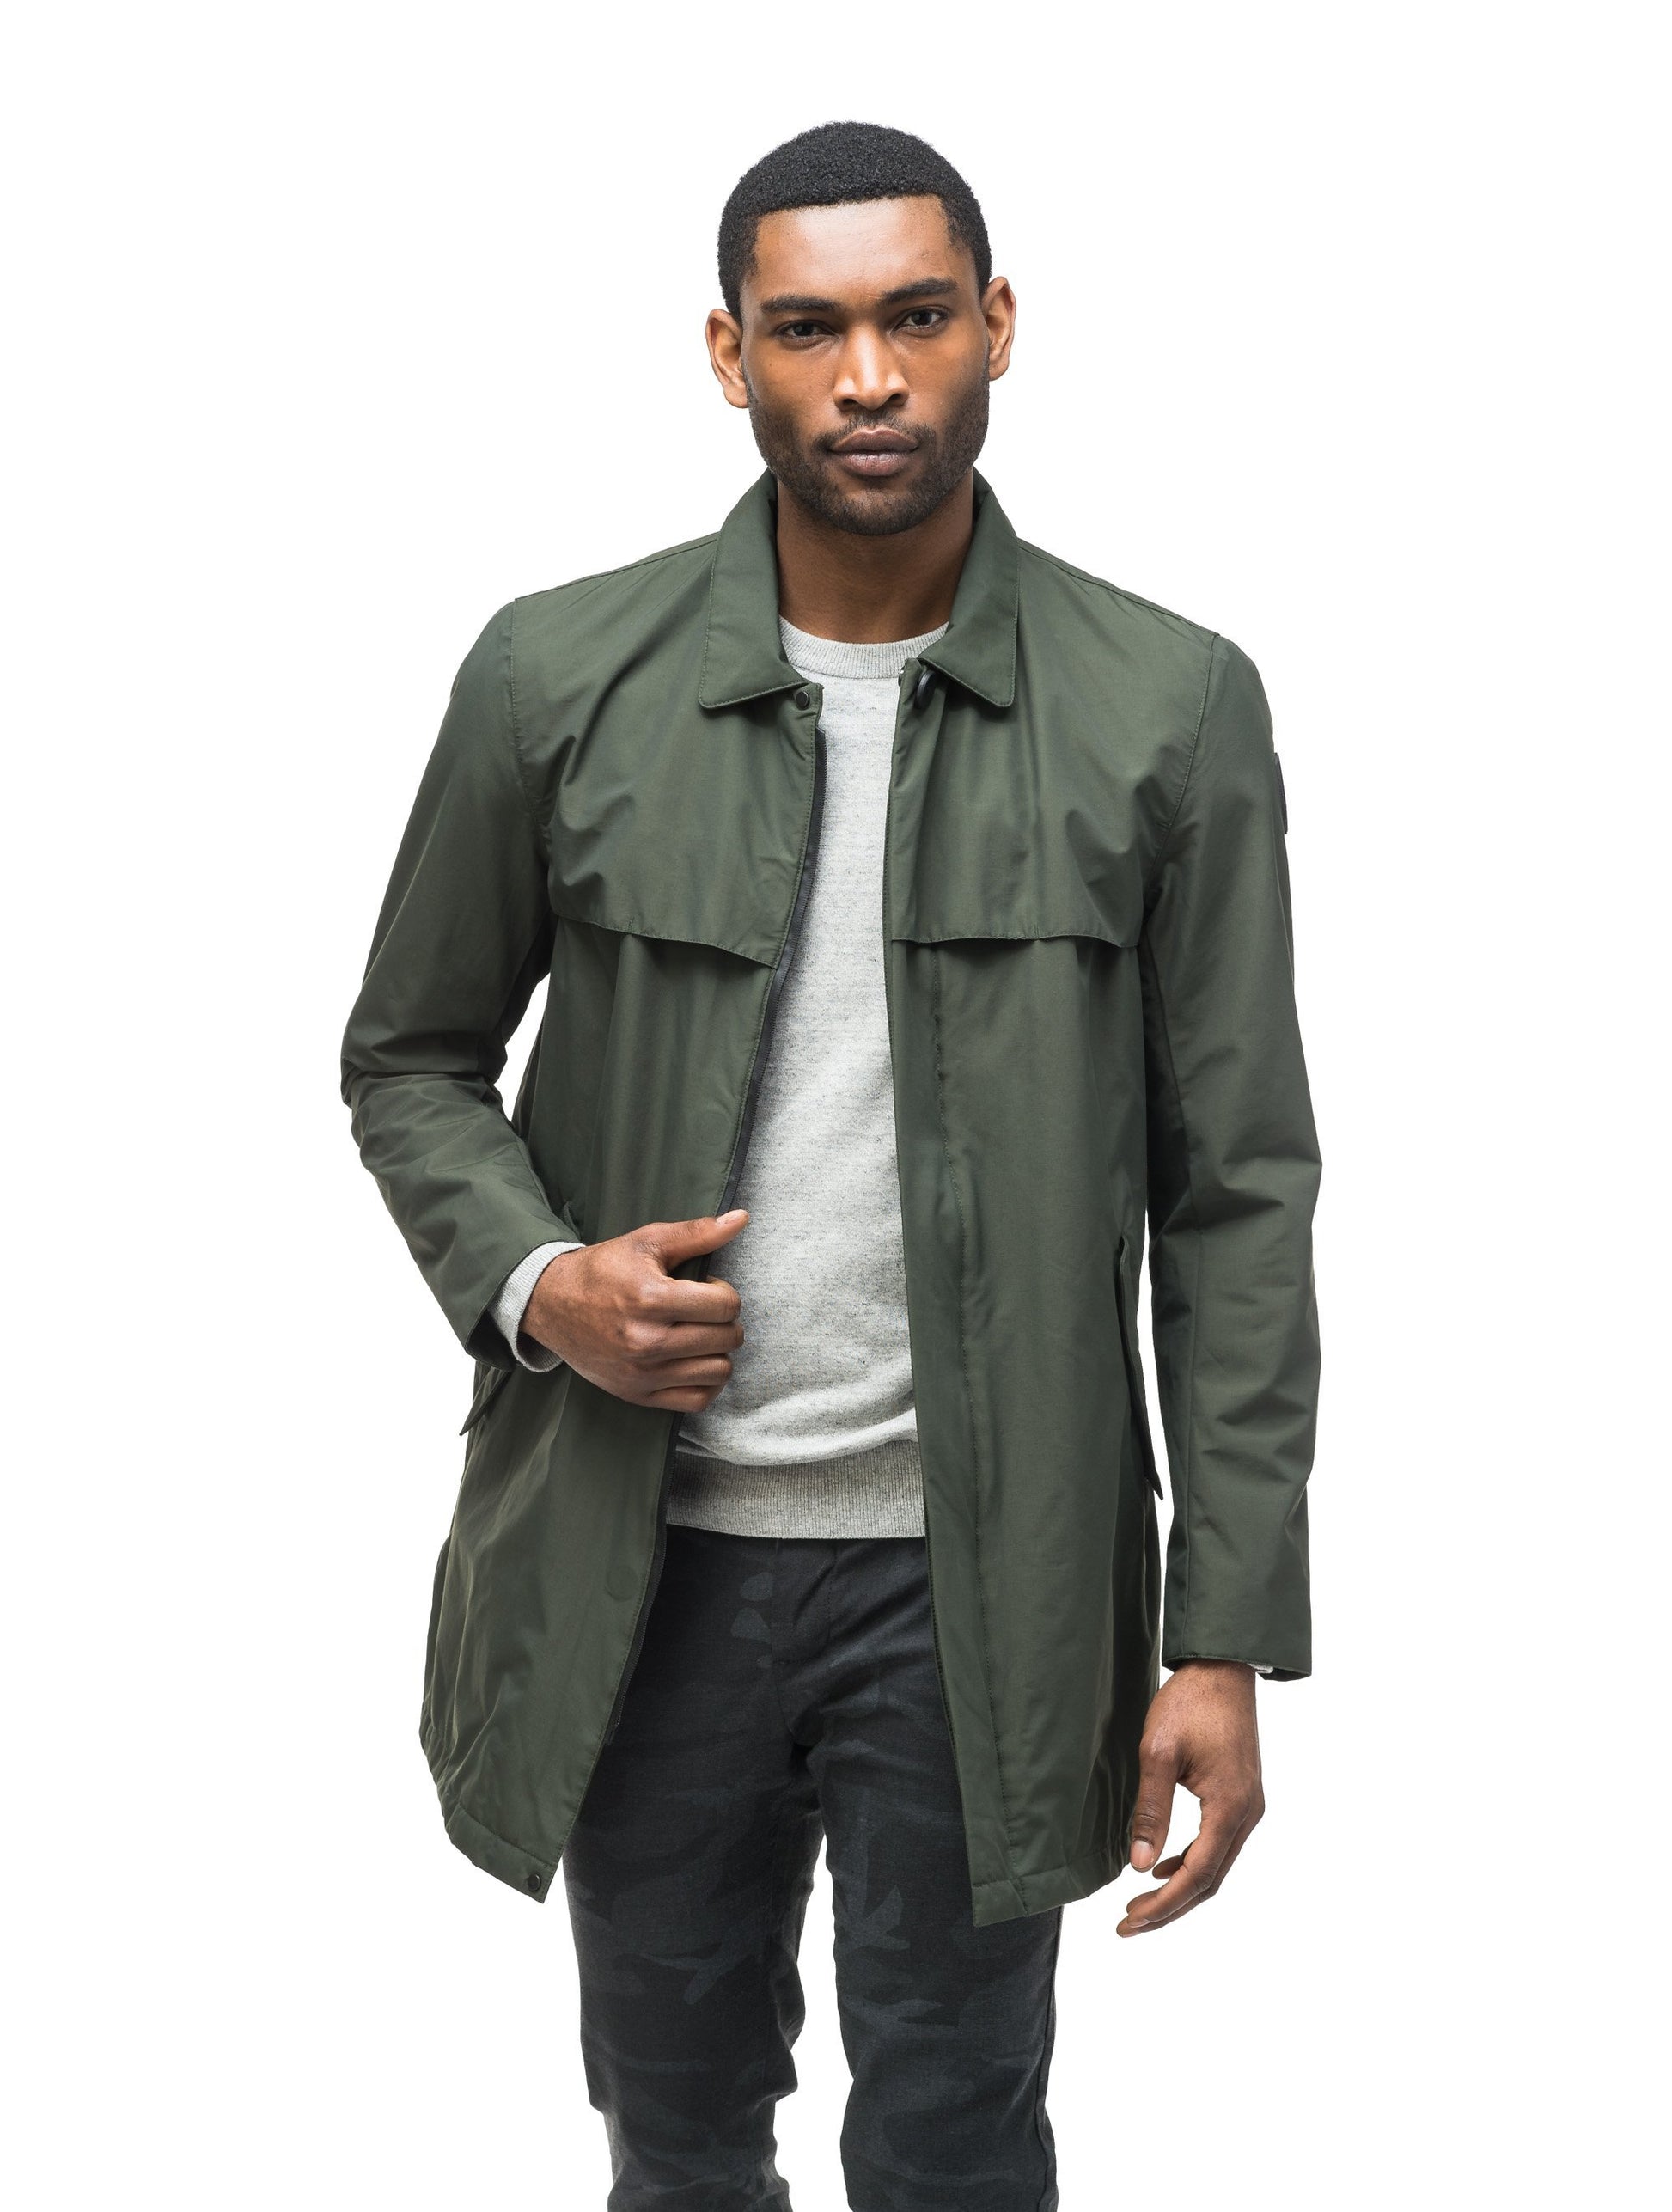 Men's waist length raincoat with a magnetic placket and top button detail in Dk Forest